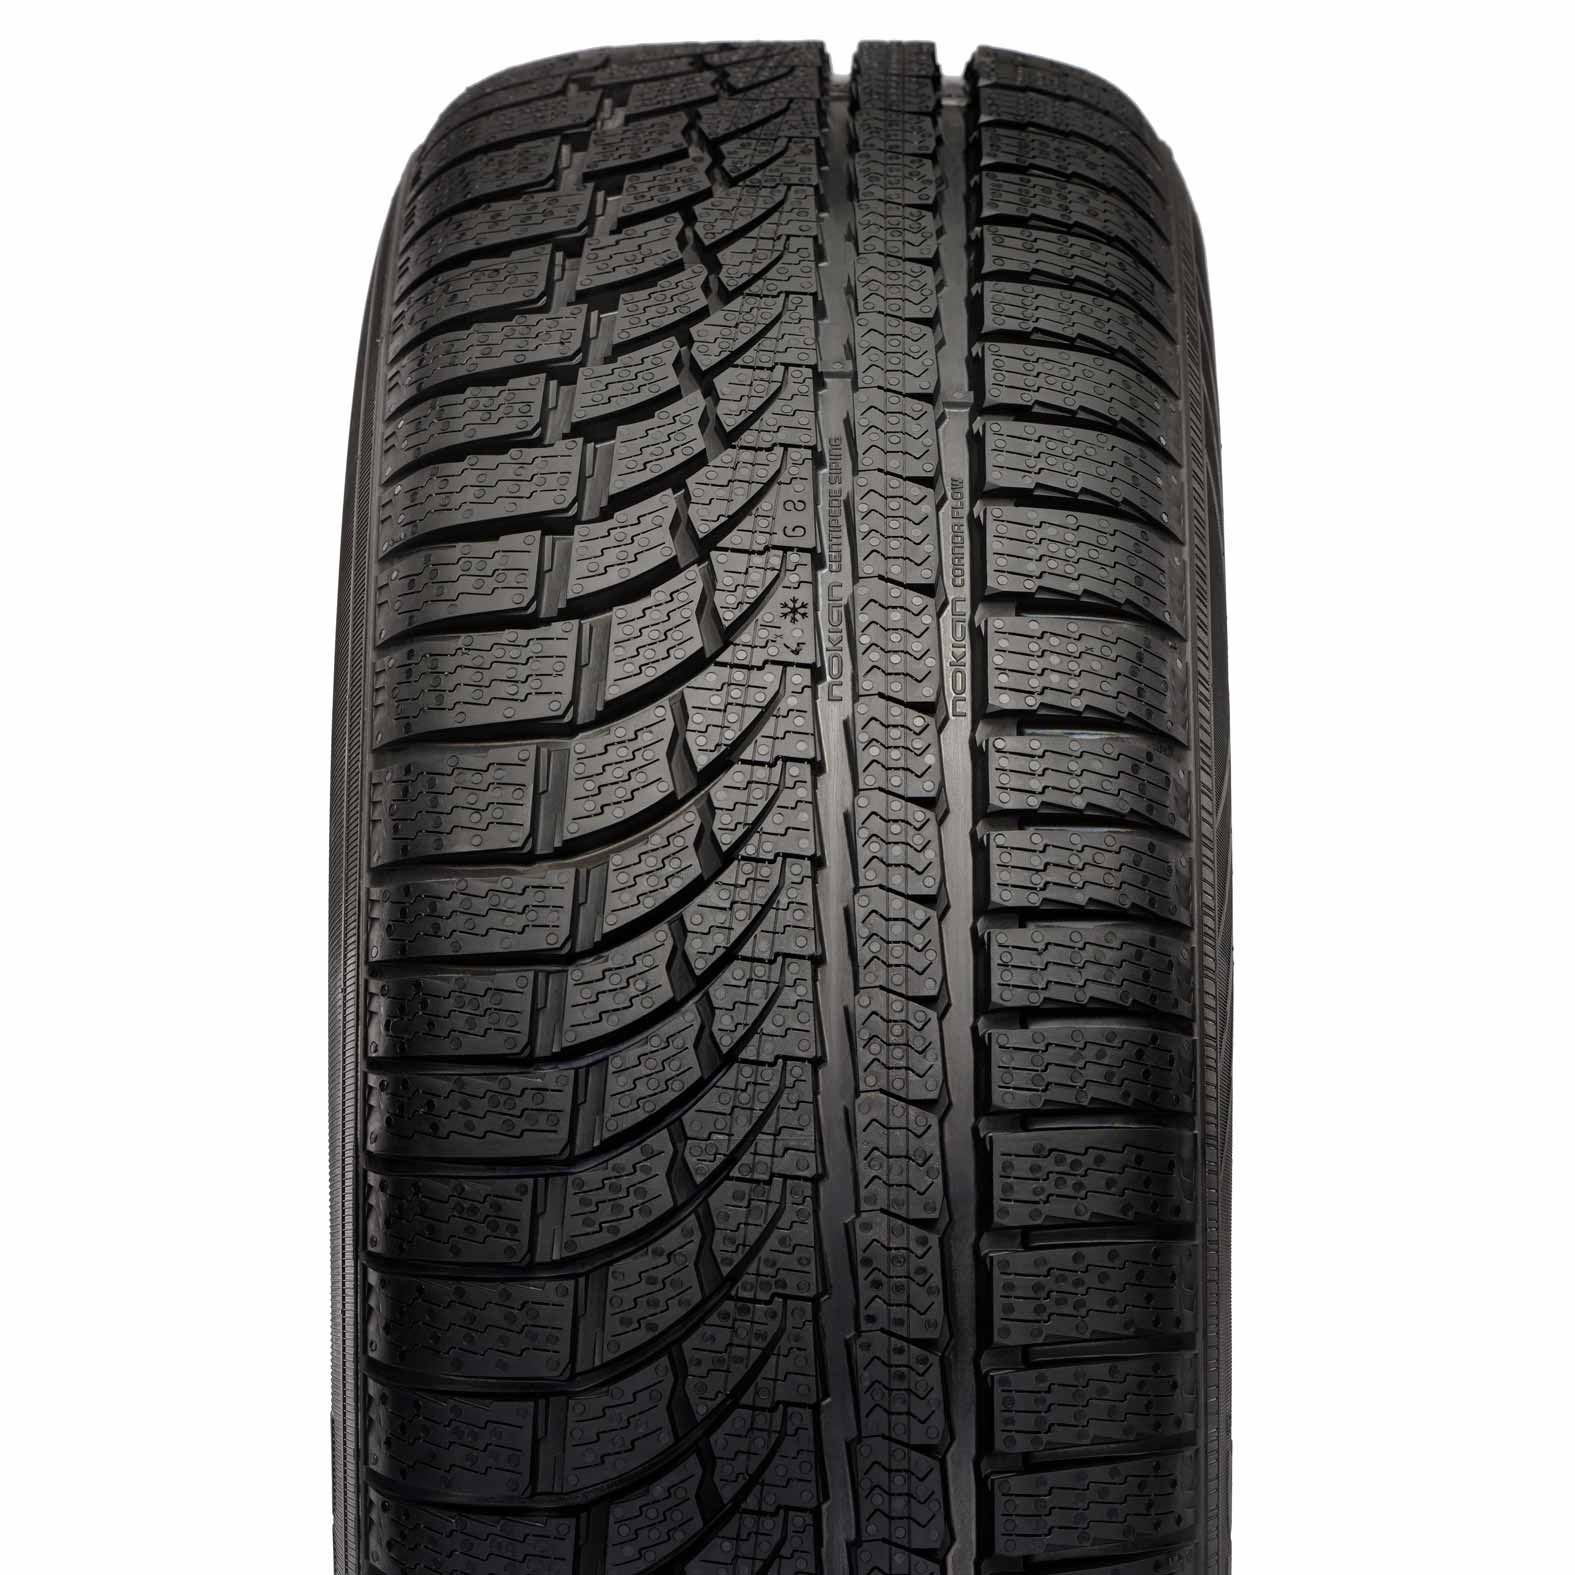 nokian-wrg4-tires-for-all-weather-kal-tire